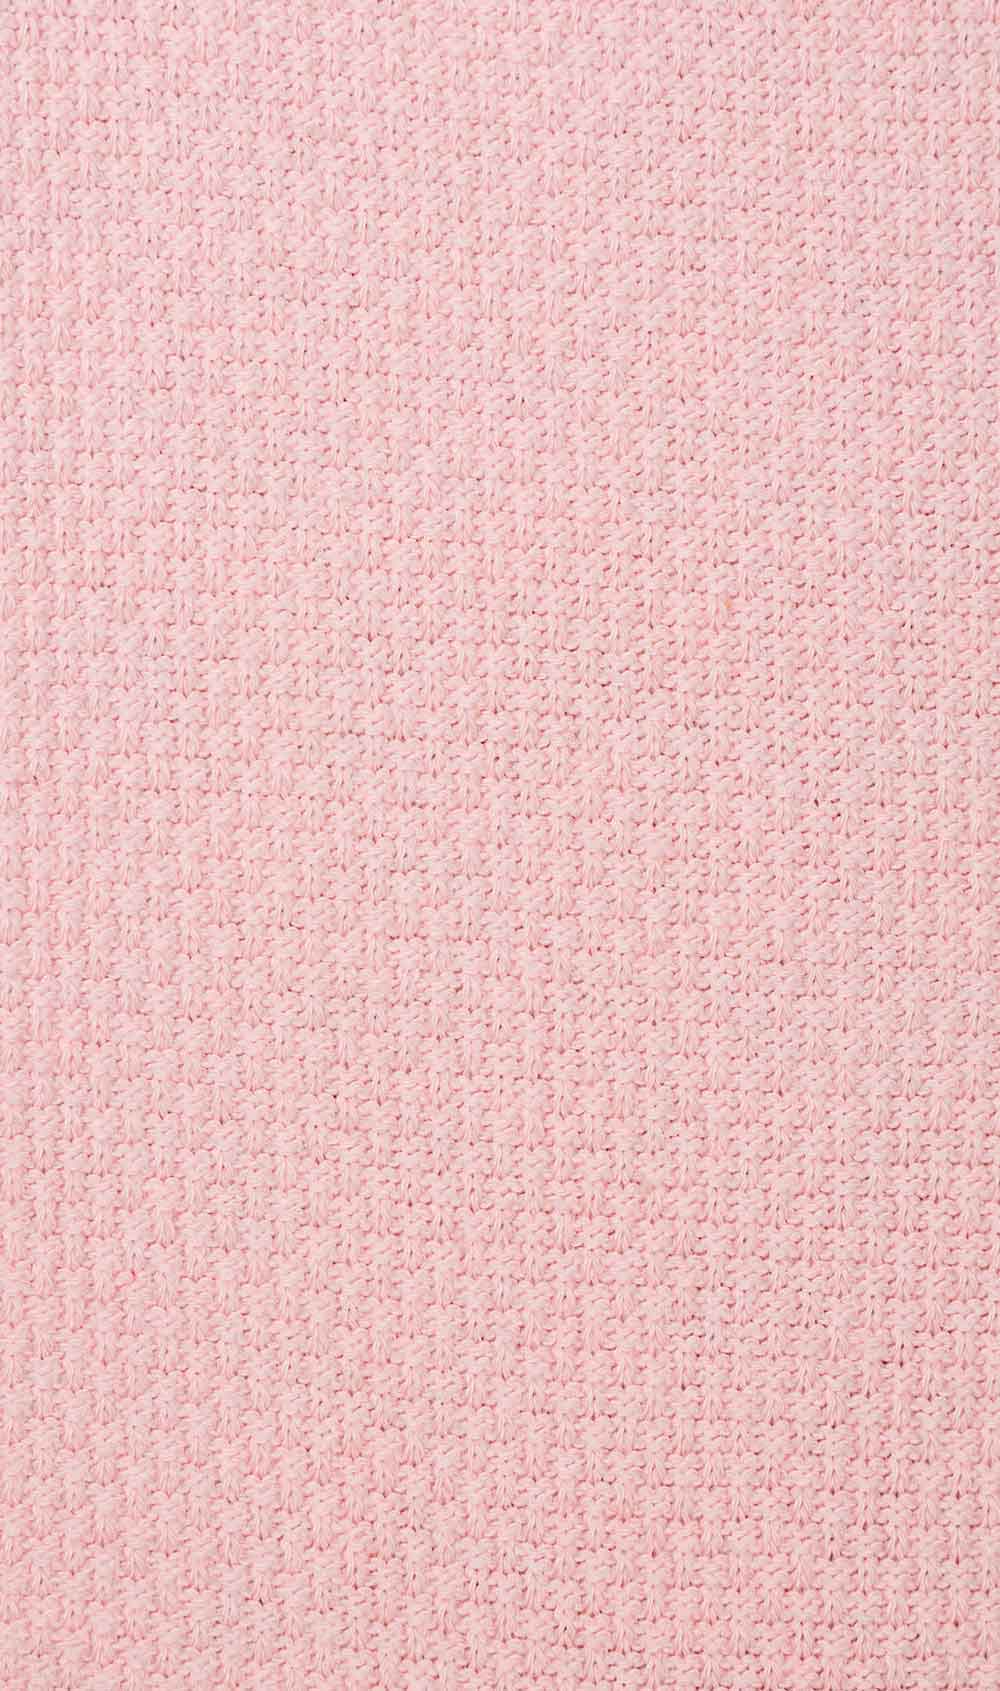 Baby Pink Textured Cotton-Blend Socks Fabric